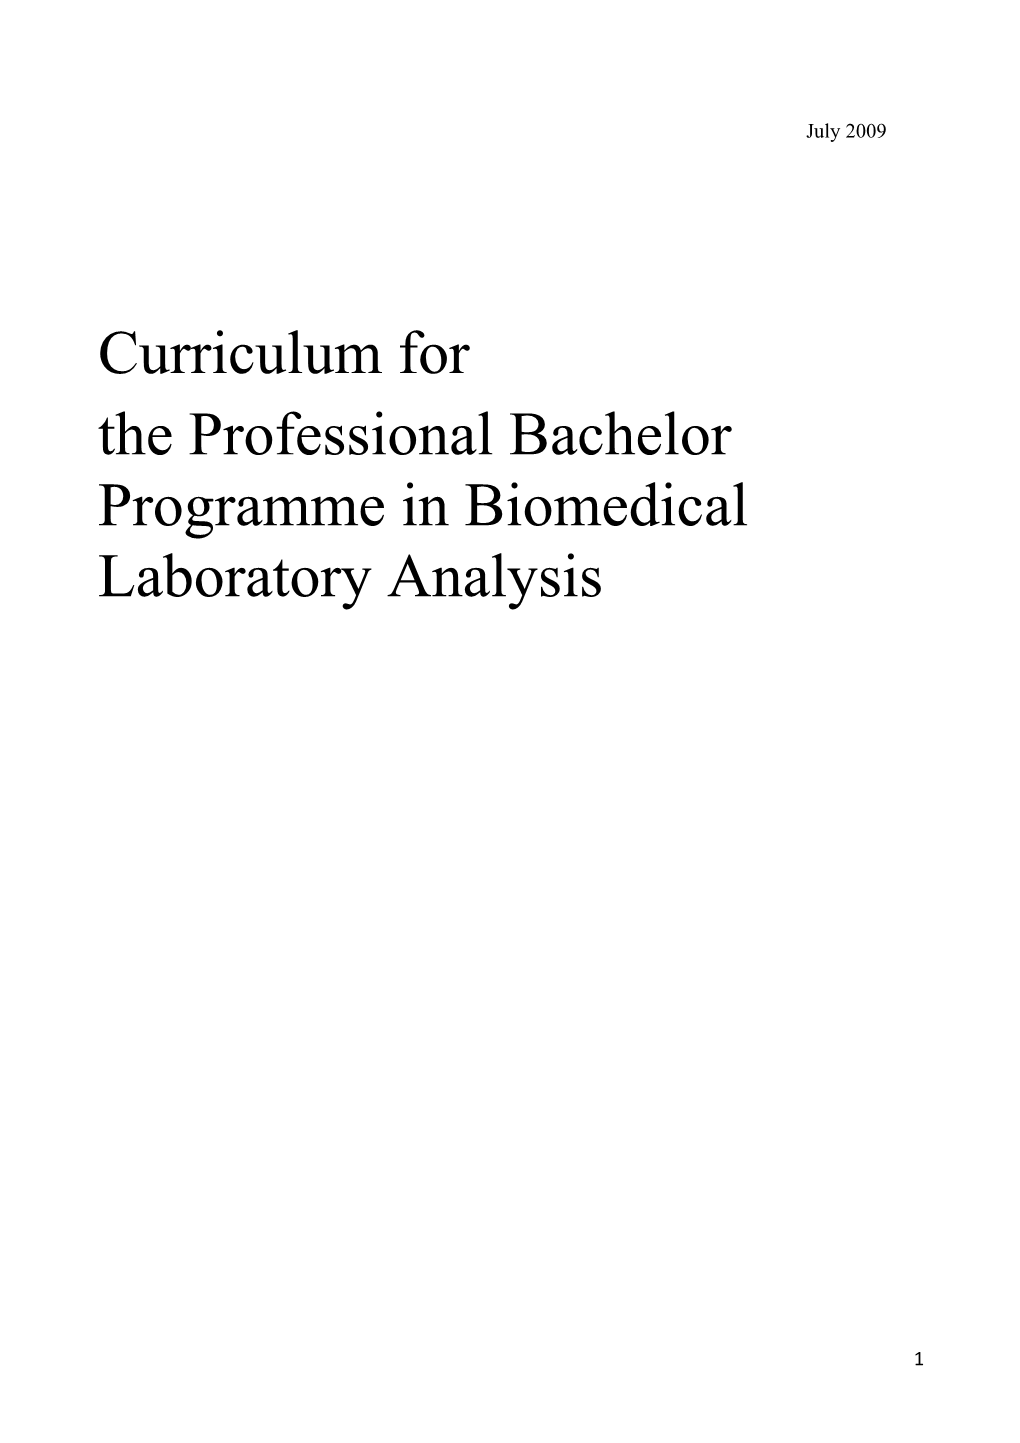 The Professional Bachelor Programme in Biomedical Laboratory Analysis